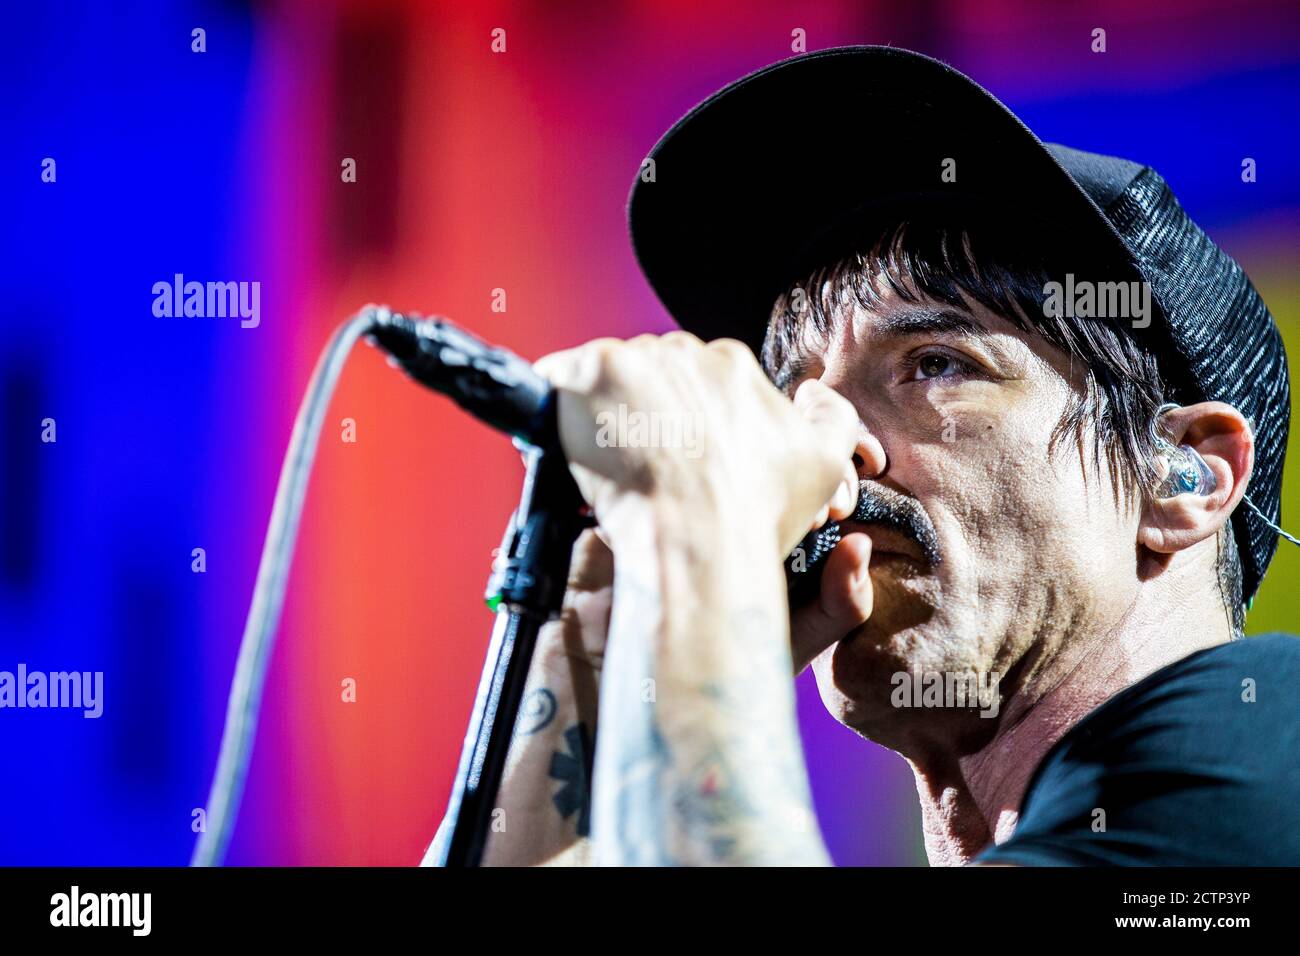 Herning, Denmark. 16th, November 2016. The American rock band Red Hot Chili  Peppers performs a live concert at Boxen in Herning. Here lead singer and  songwriter Anthony Kiedis is seen live on